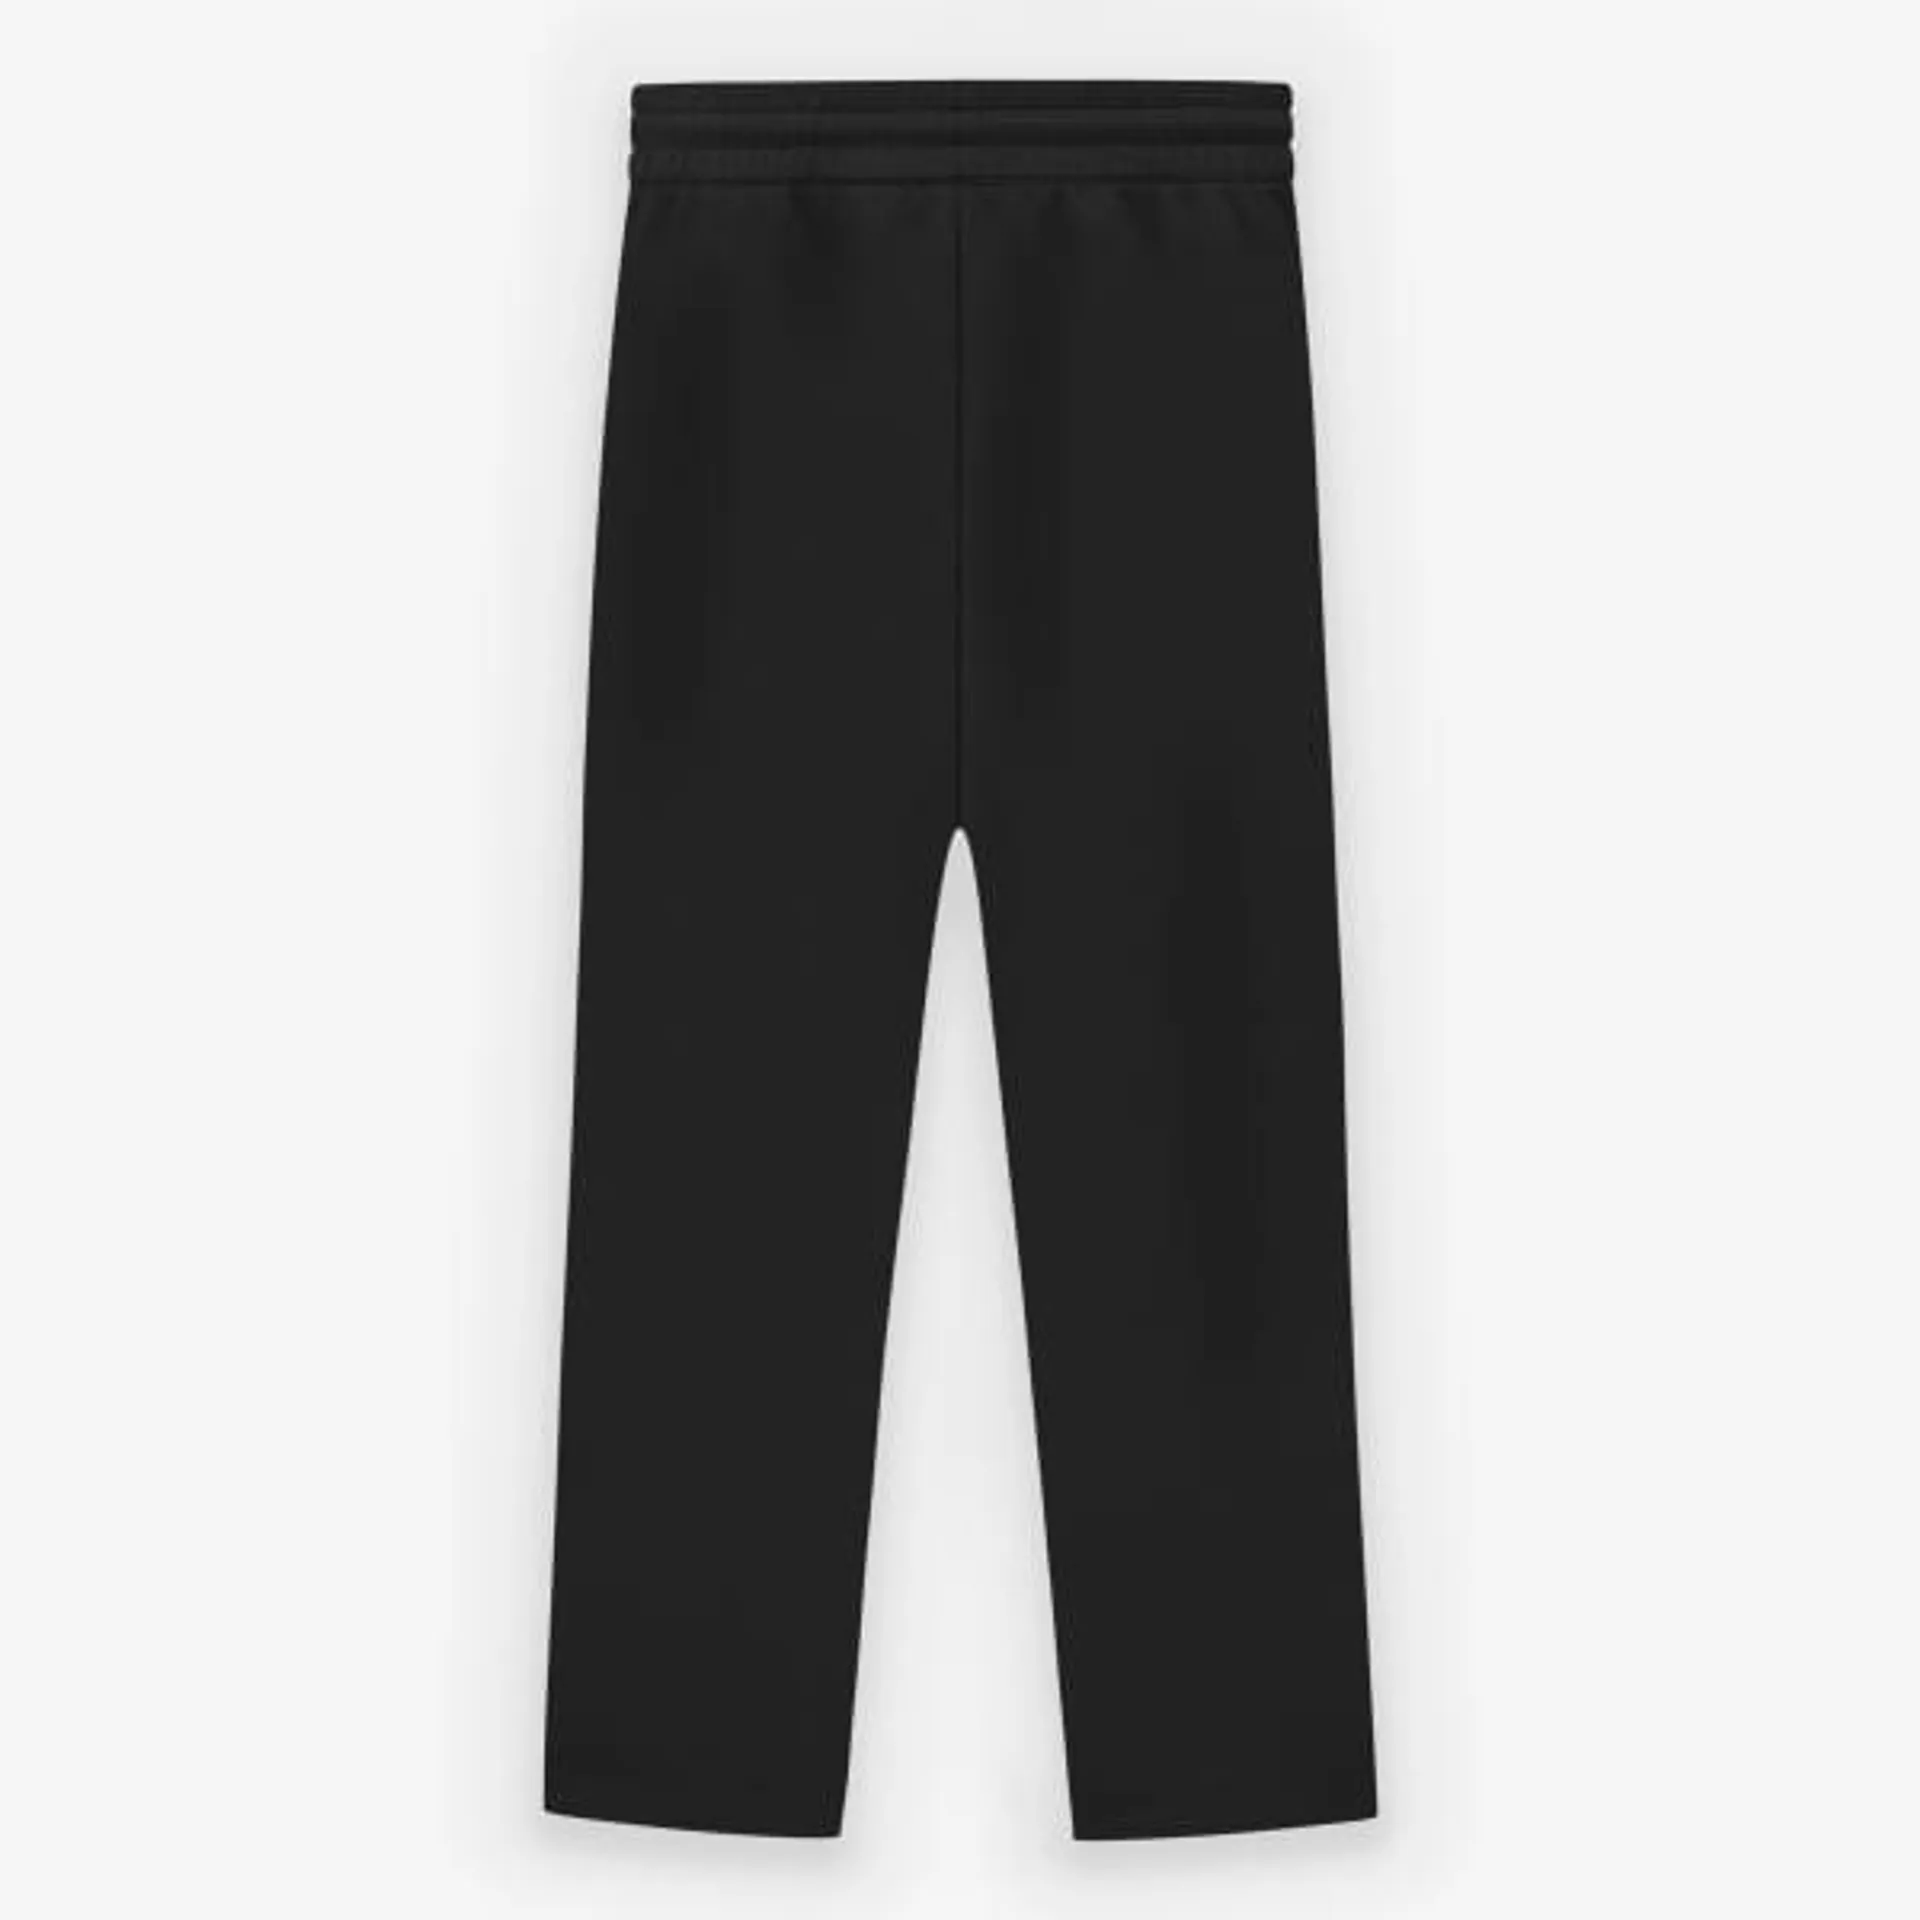 Fear of God Athletics Suede Fleece Relaxed Pants